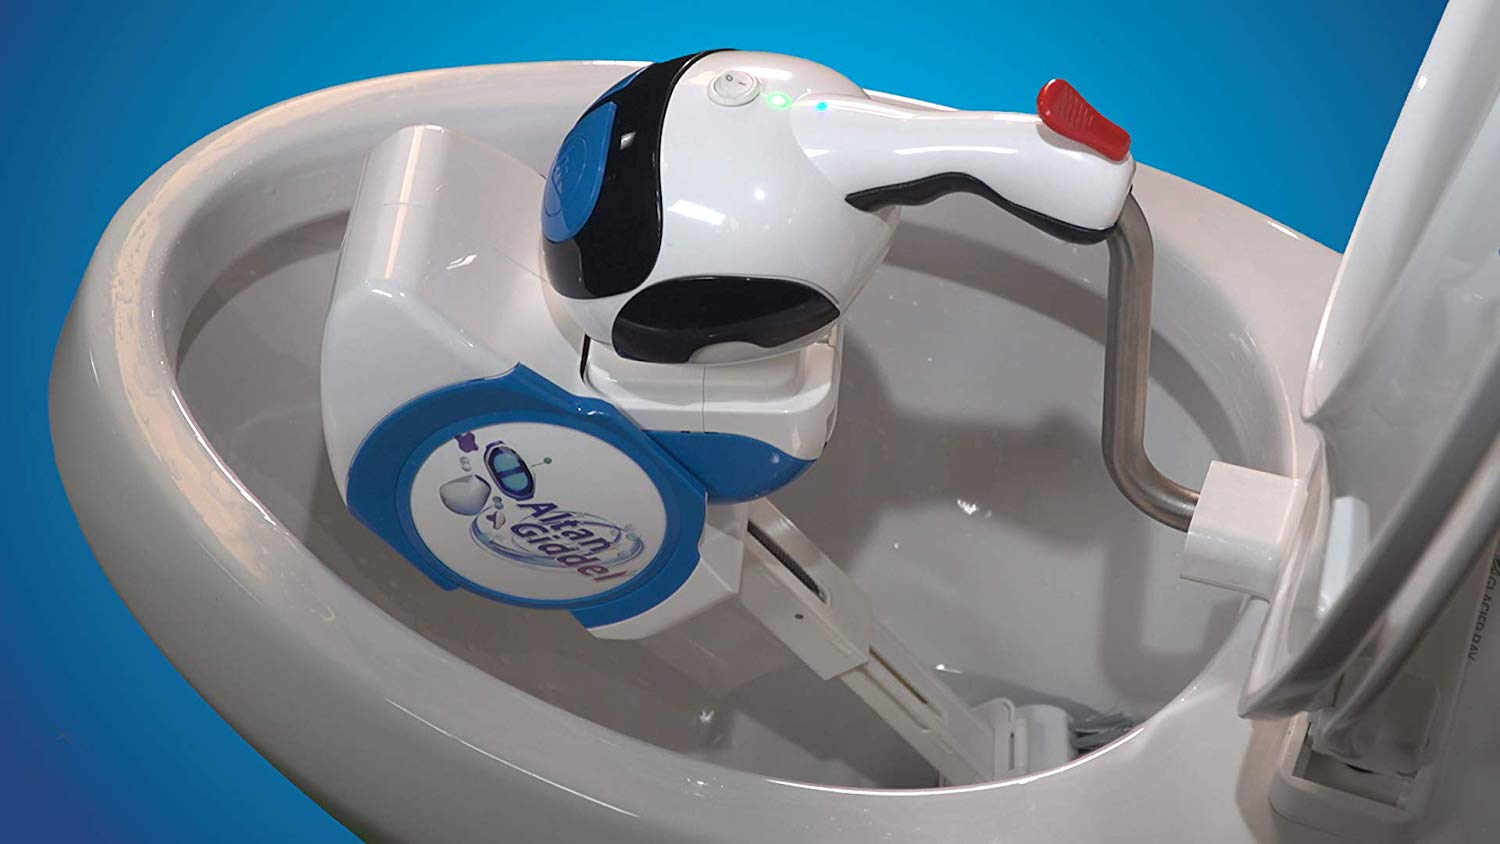 Giddel: the new toilet cleaning robot from Altan Robotech.